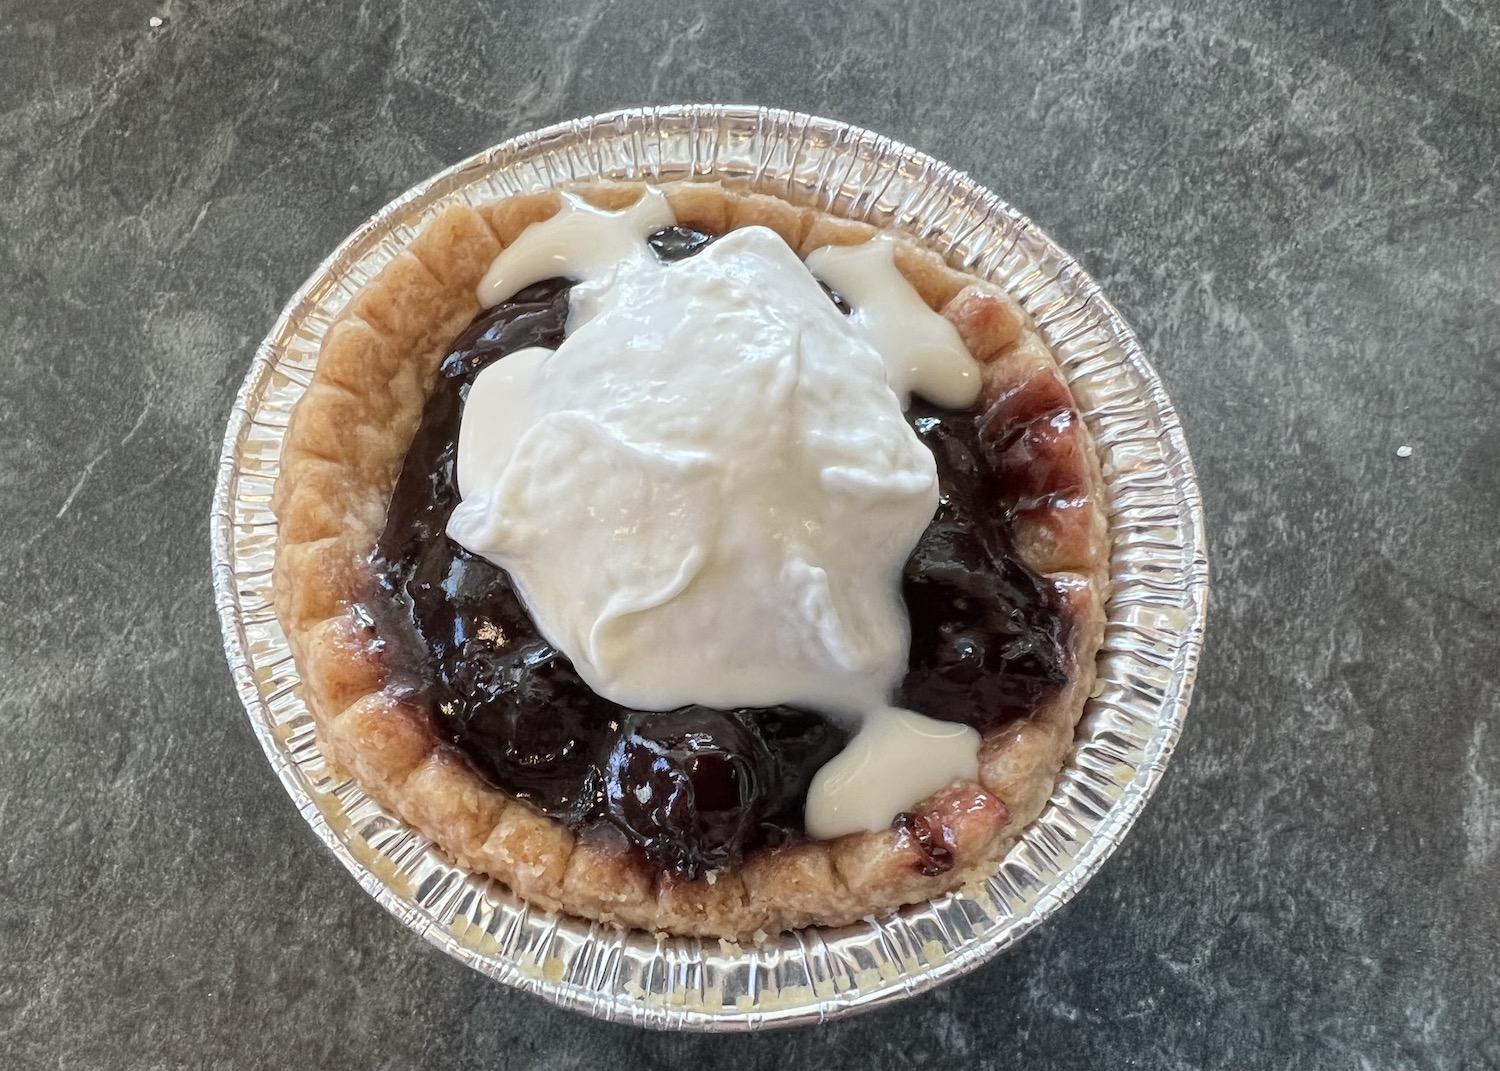 The Saskatoon berry tart from the Batoche café is made with a local berry long loved by the Métis.